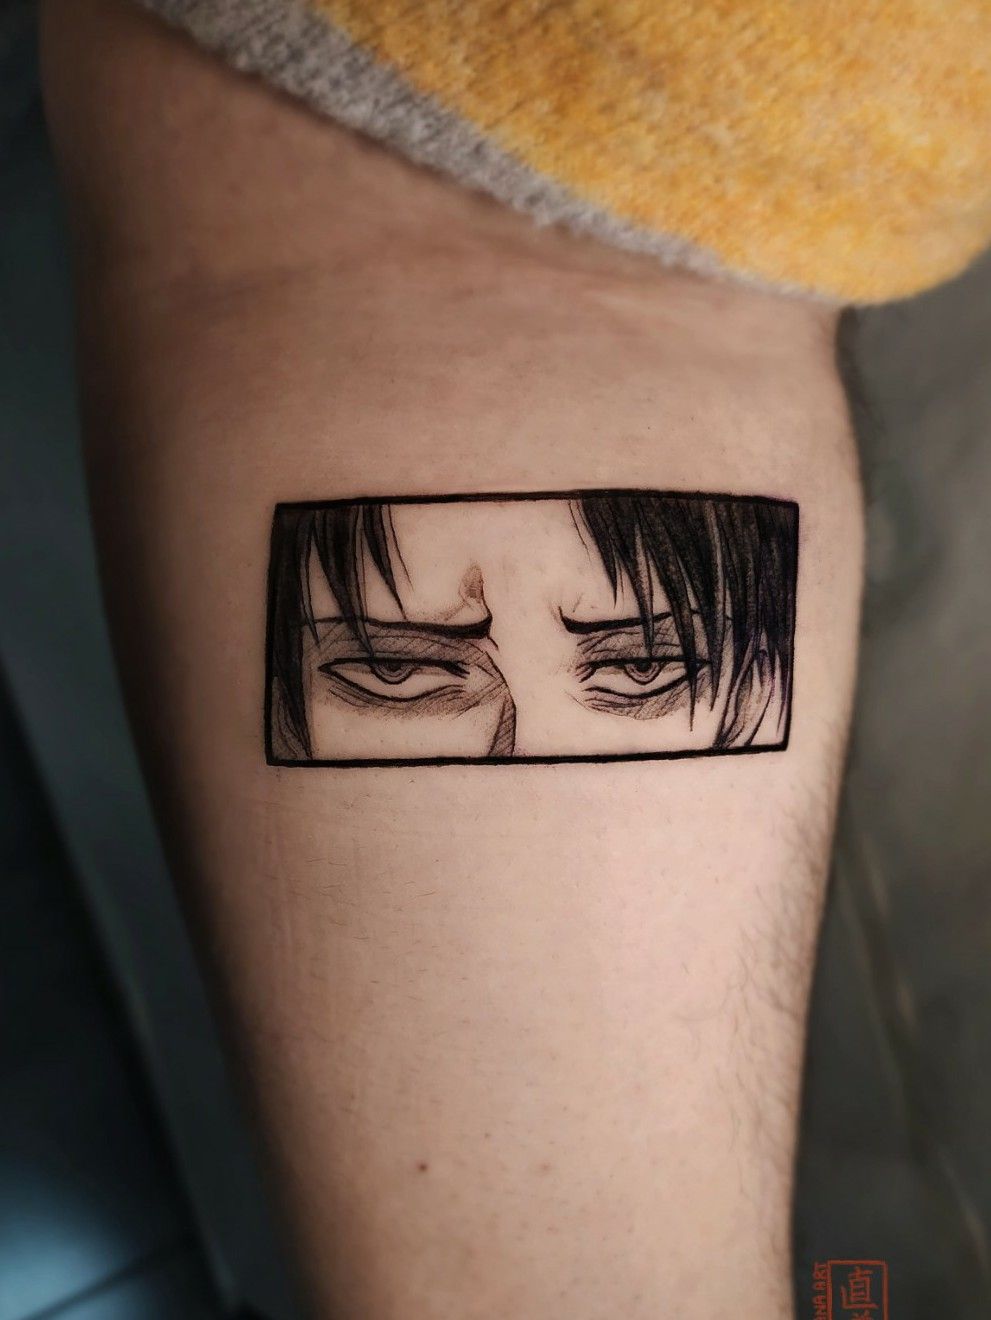 Michael Randazzo on Instagram Got to slap this sick Levi tattoo on  timthetatman always a blast hanging with this dude He fucks with tekken 7  though be aware his main